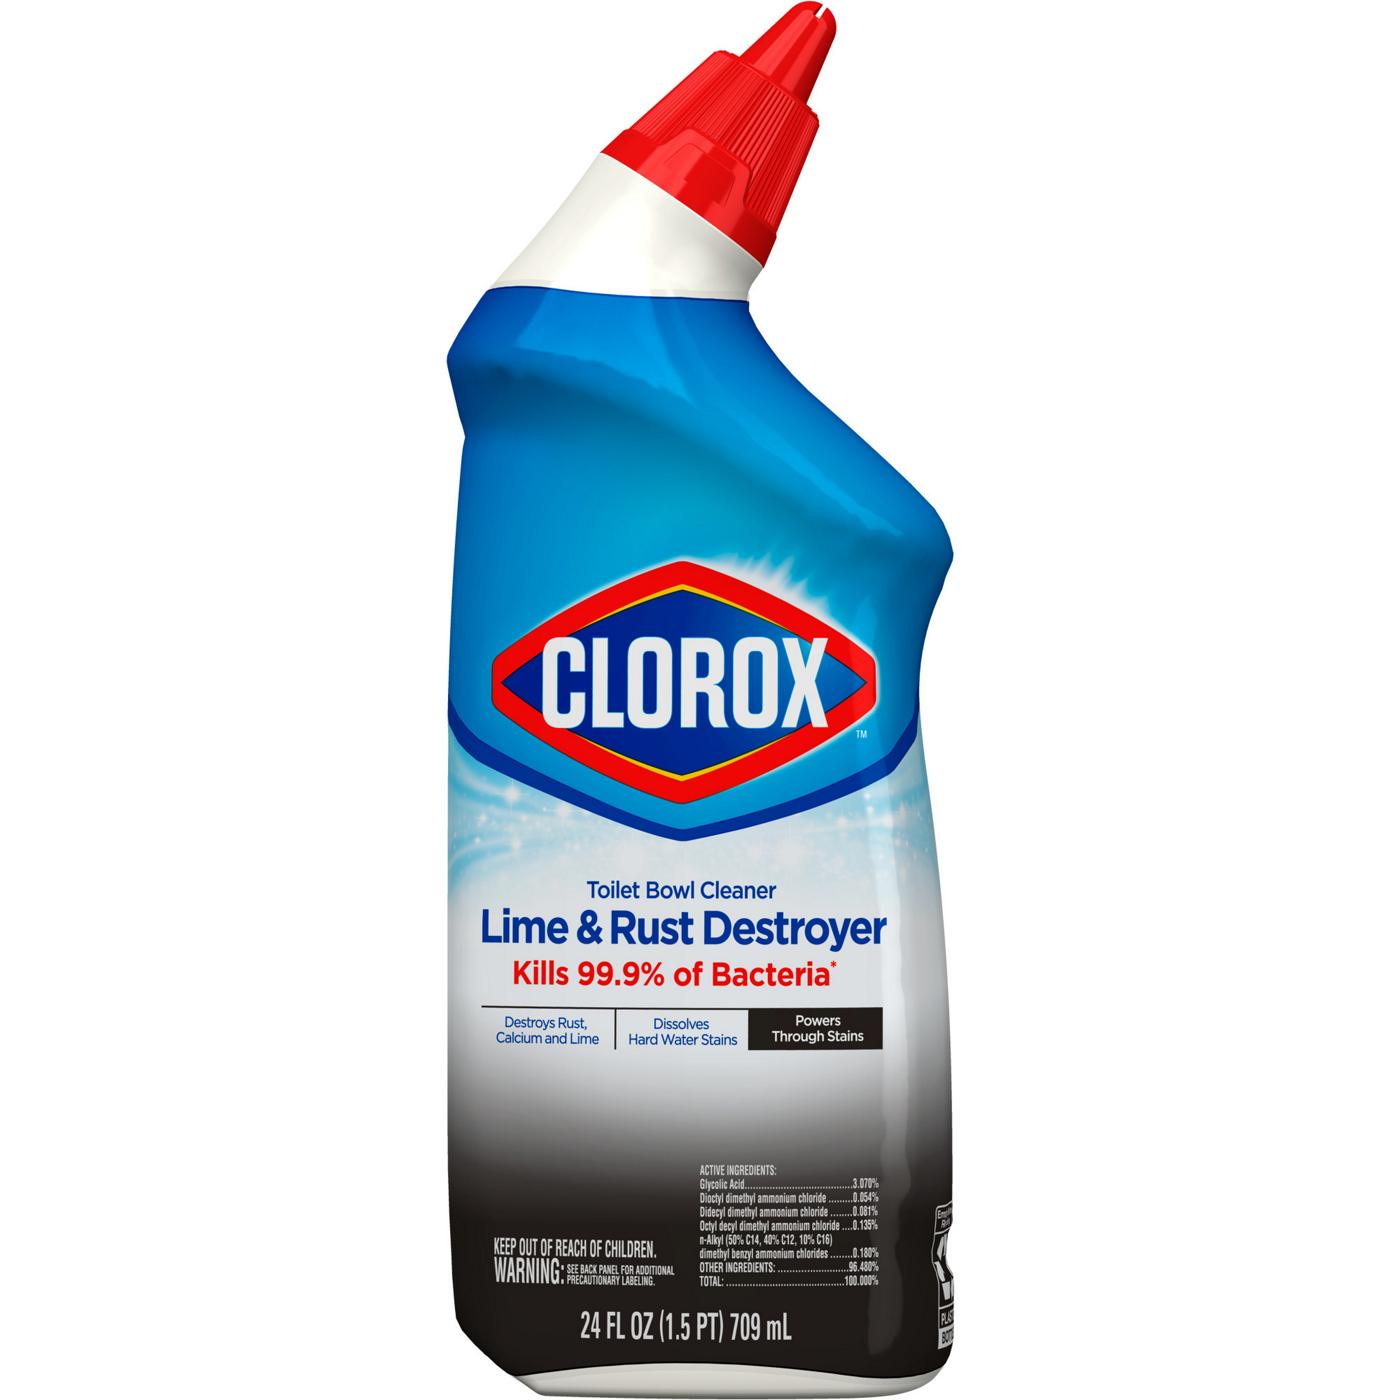 Clorox Toilet Bowl Cleaner Lime & Rust Destroyer; image 1 of 8